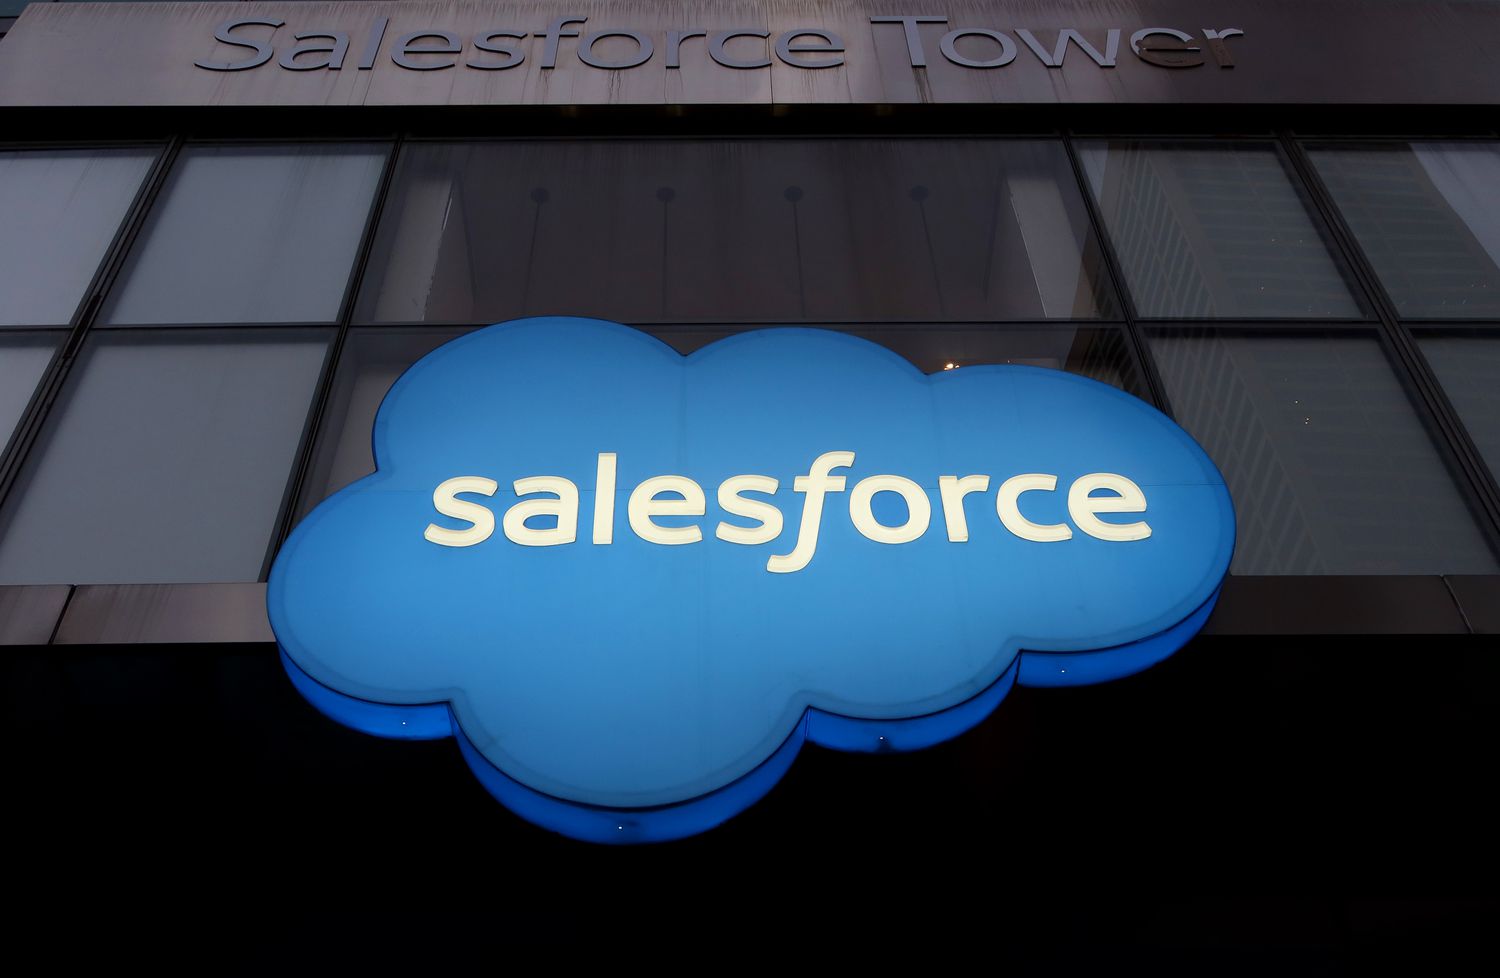 Salesforce Stock Gains as CRM Software Giant Holds Its Annual Shareholder Meeting [Video]